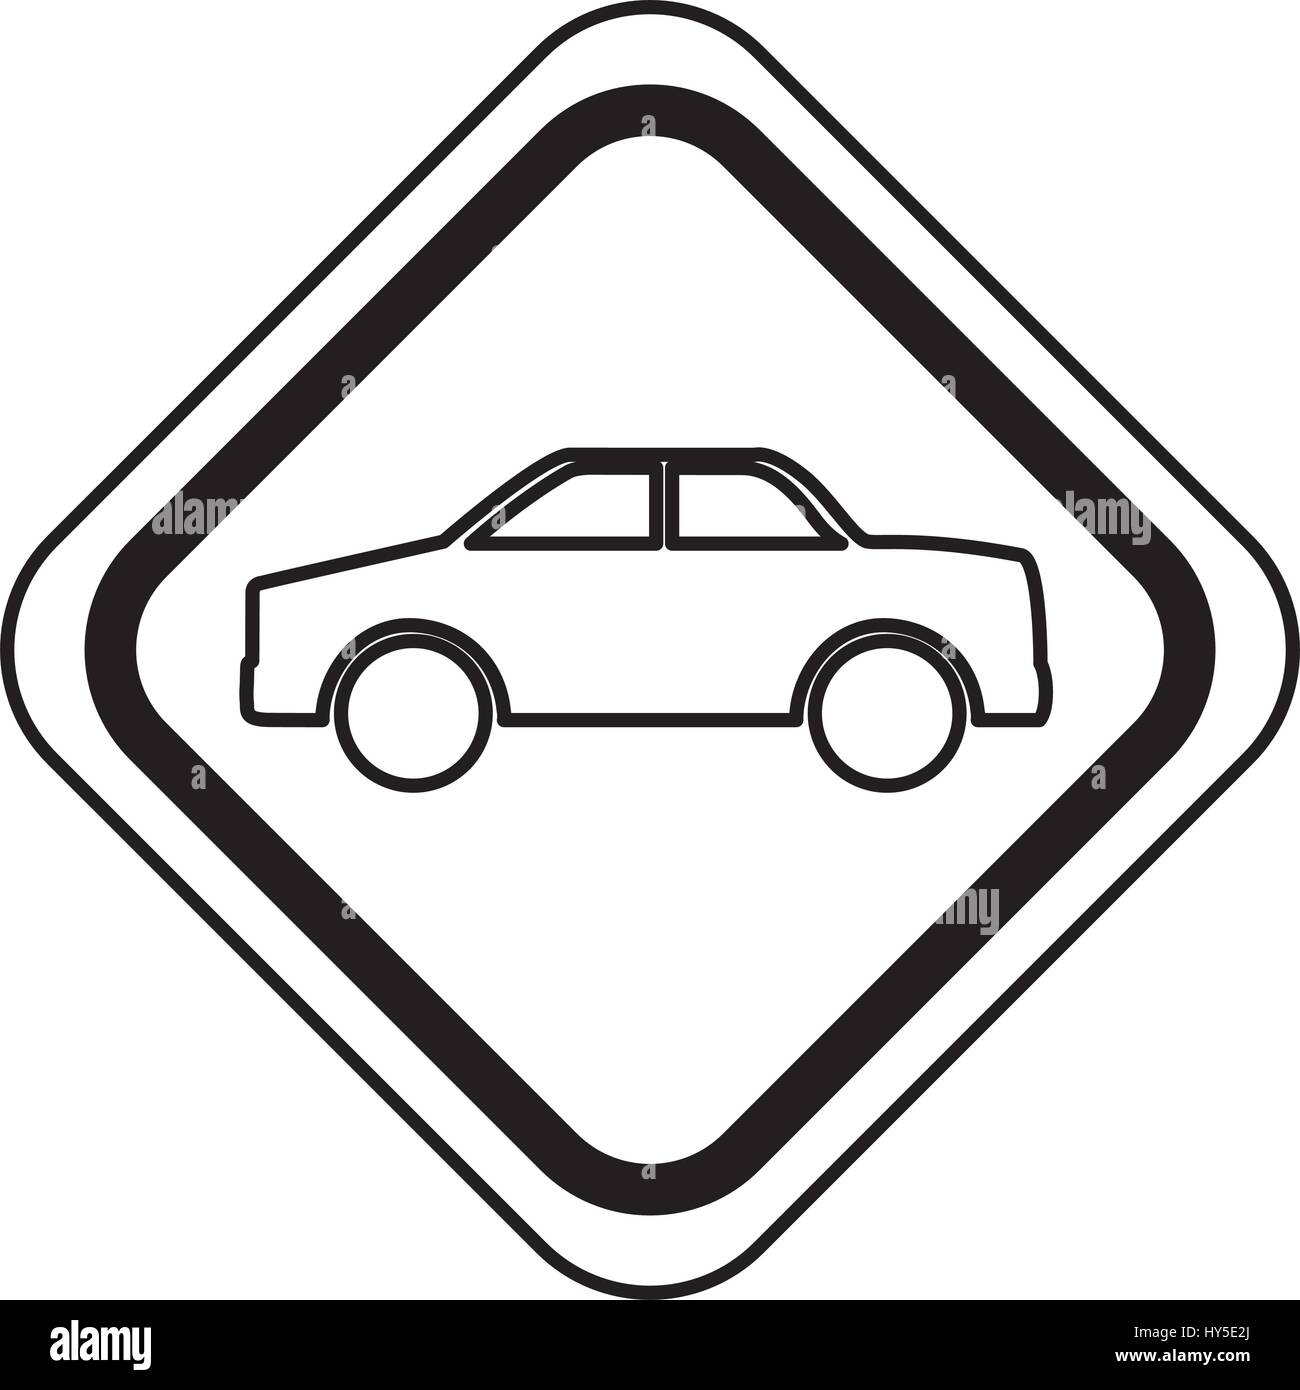 traffic signal with car vehicle isolated icon vector illustration design Stock Vector